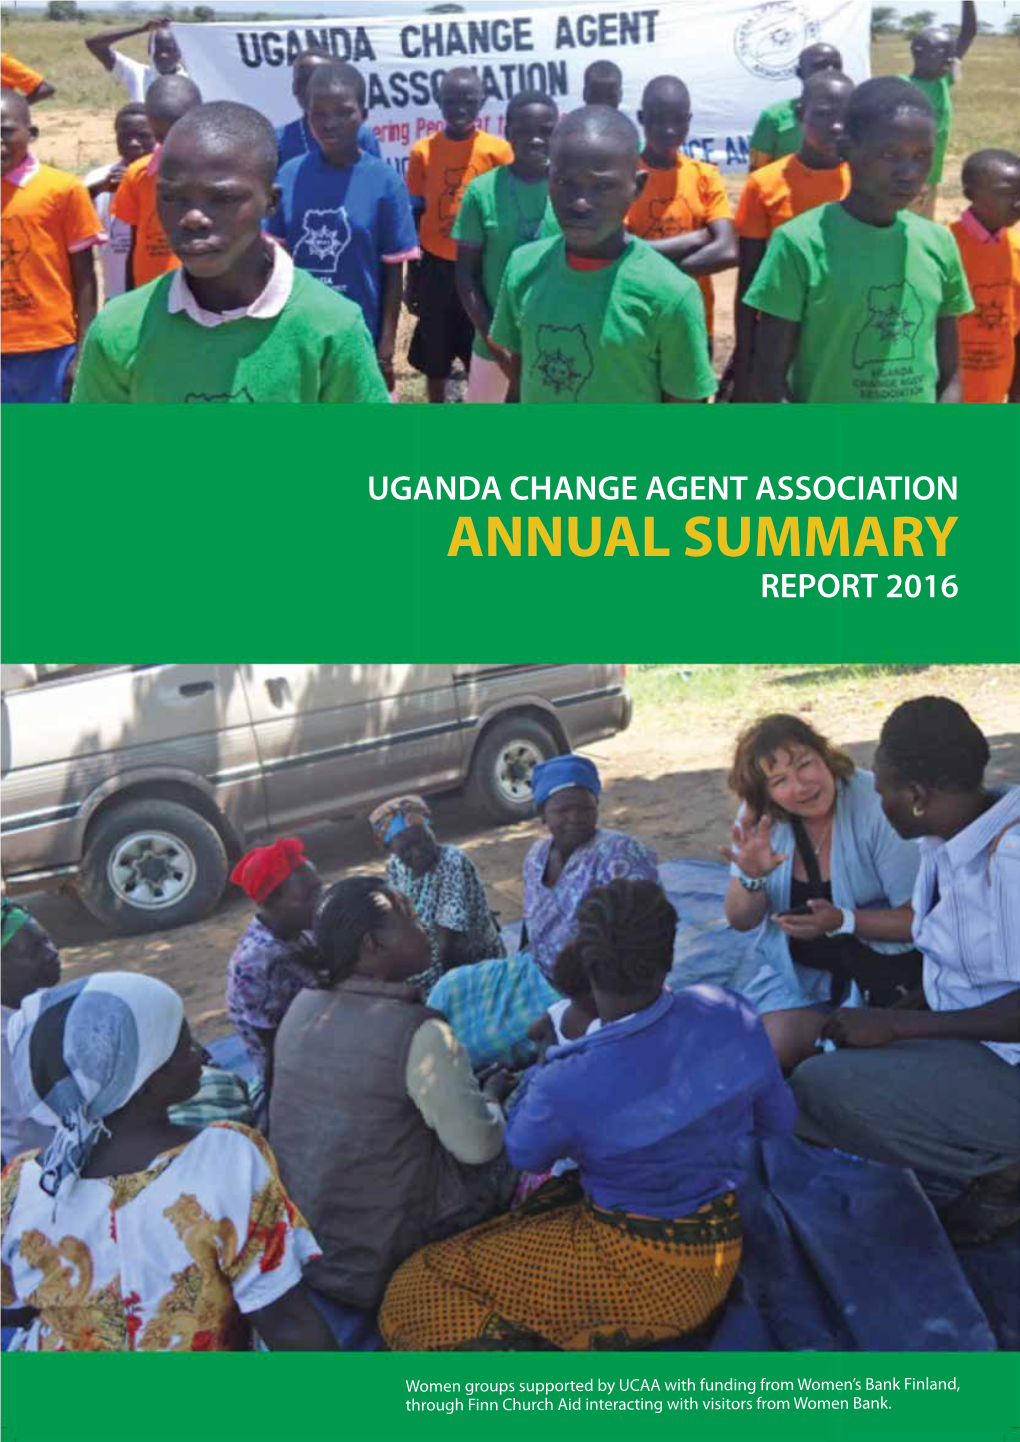 Download the Full Annual Report 2016